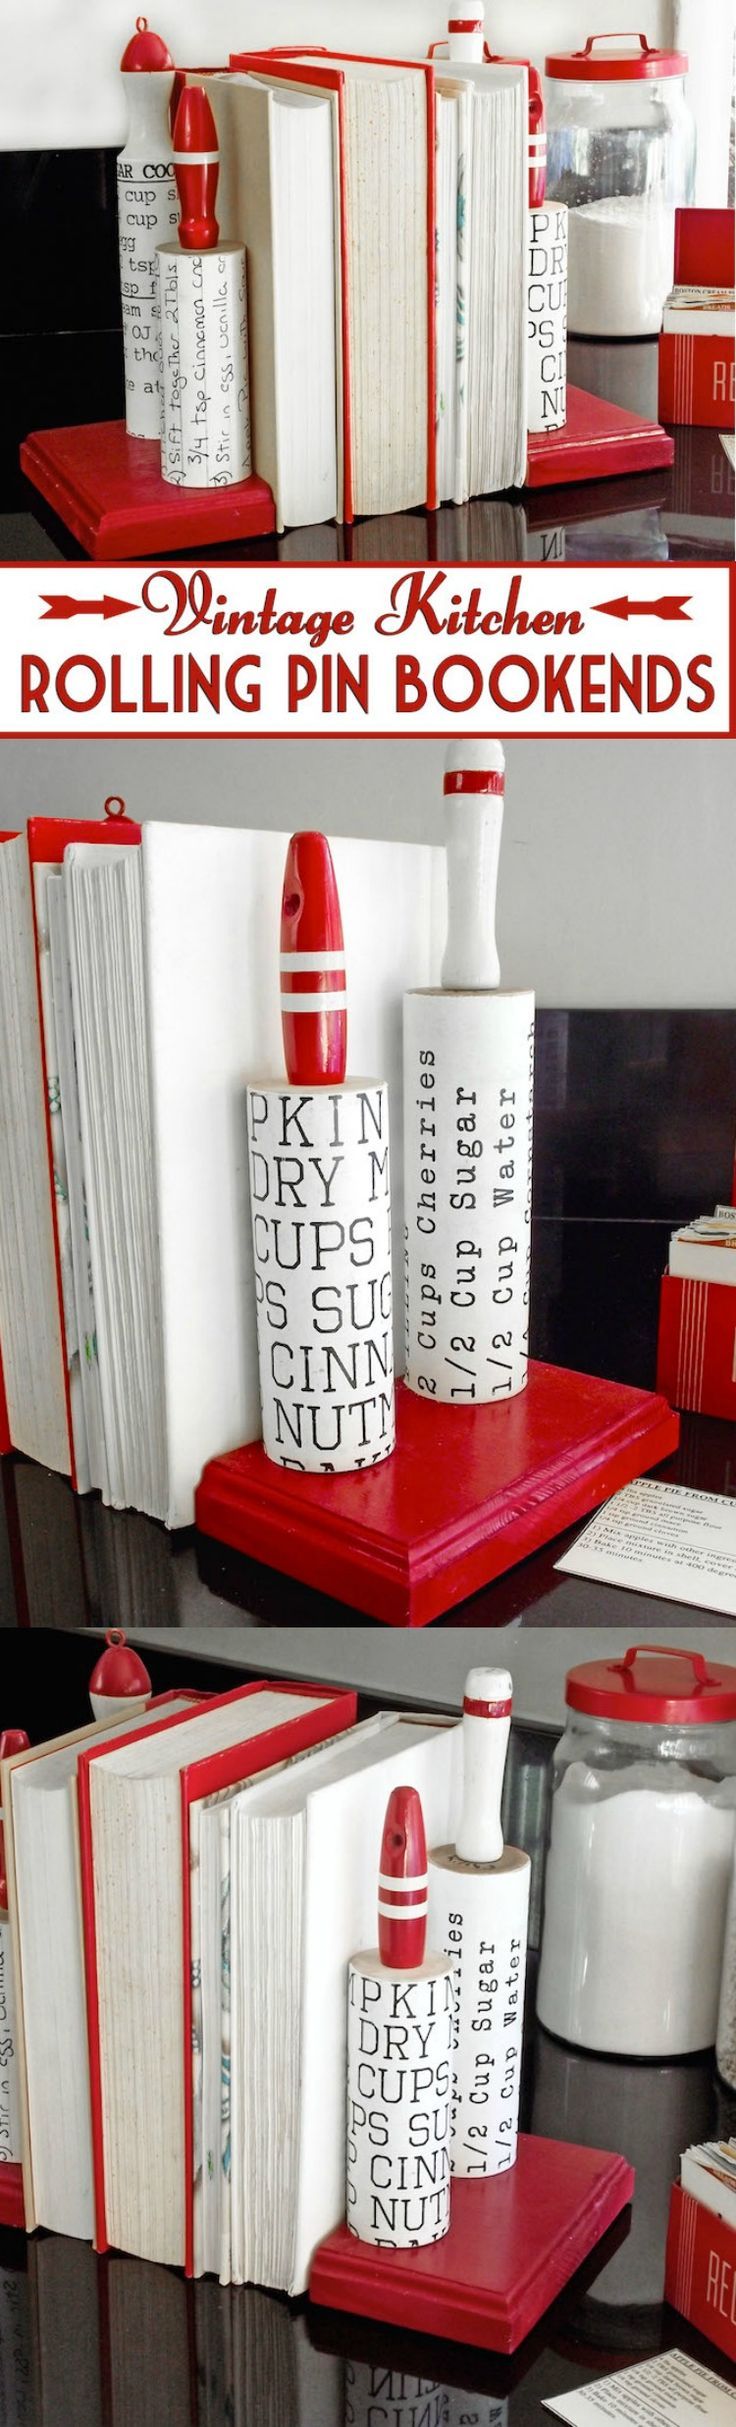 Vintage Kitchen Rolling Pin DIY Bookends